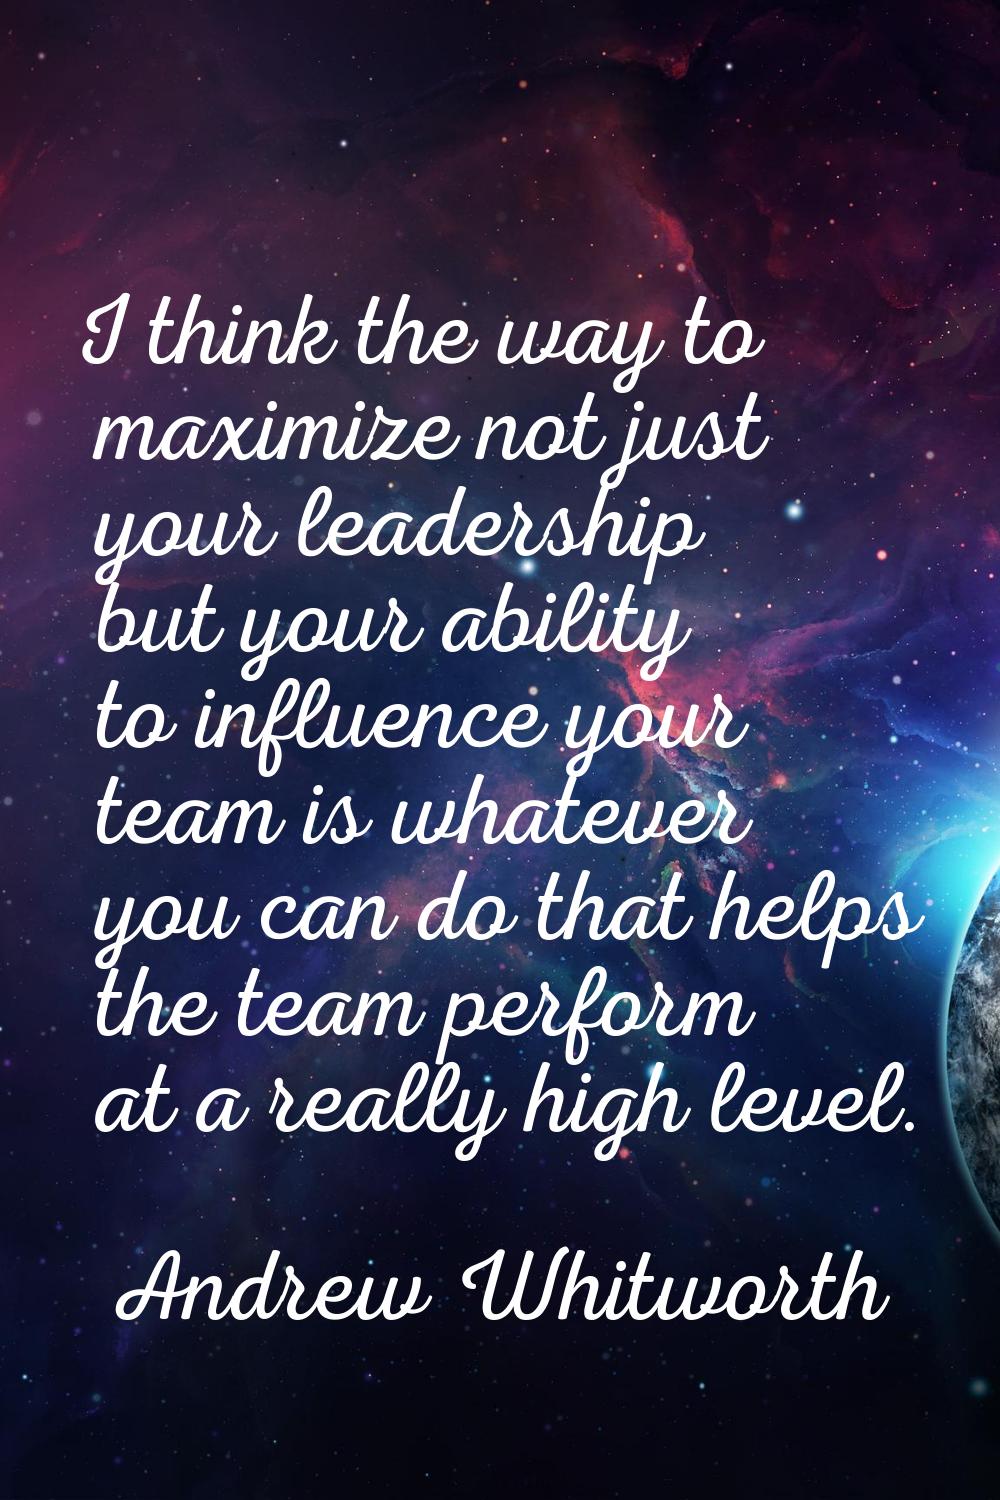 I think the way to maximize not just your leadership but your ability to influence your team is wha